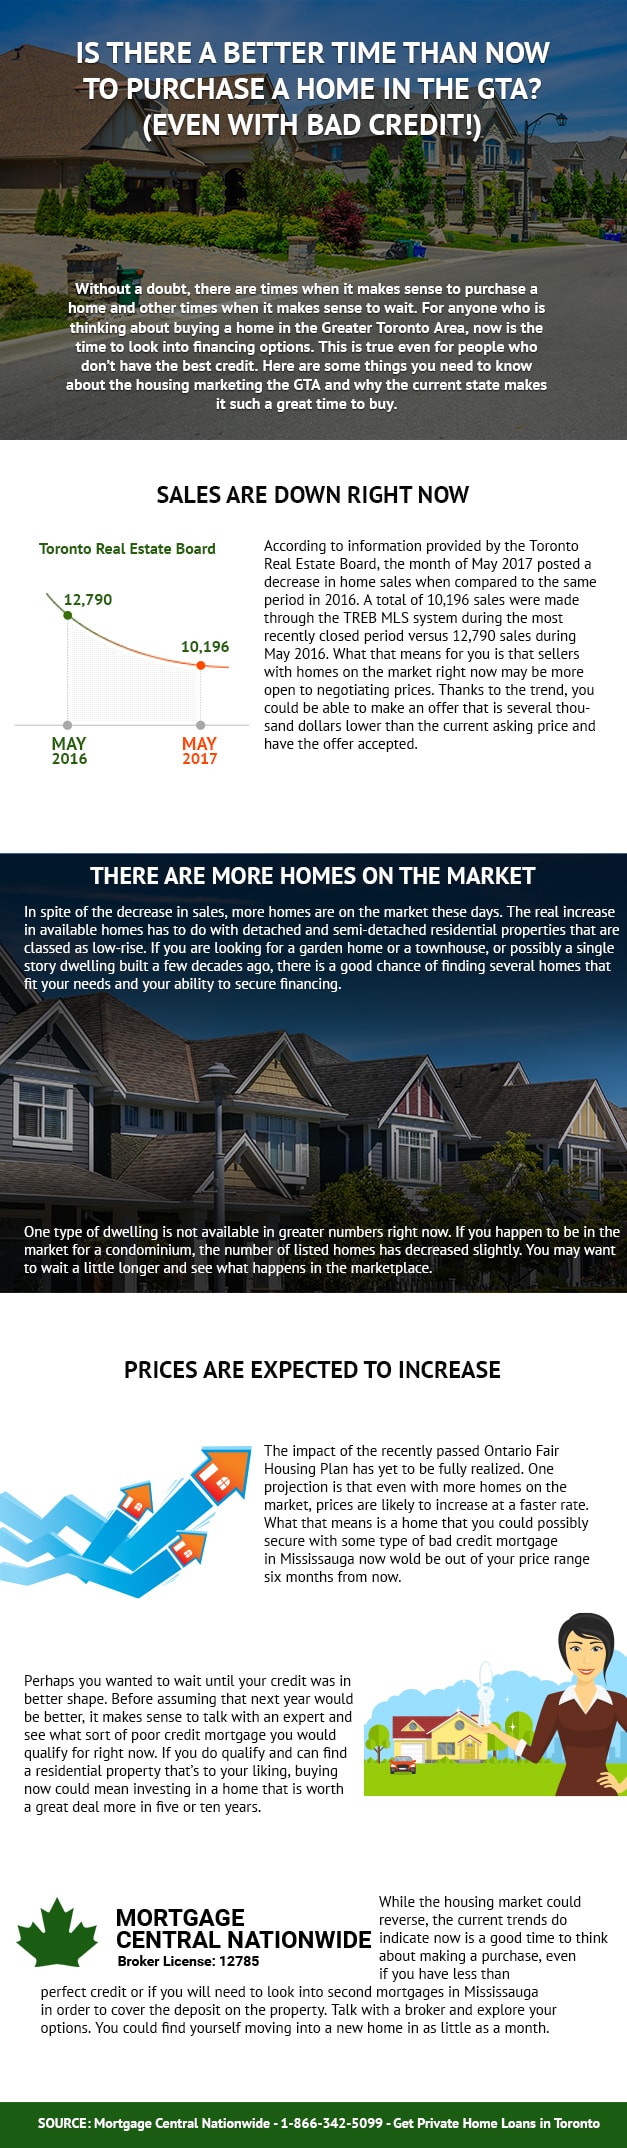 Is There a Better Time Than Now to Purchase a Home in the GTA? - Infographic